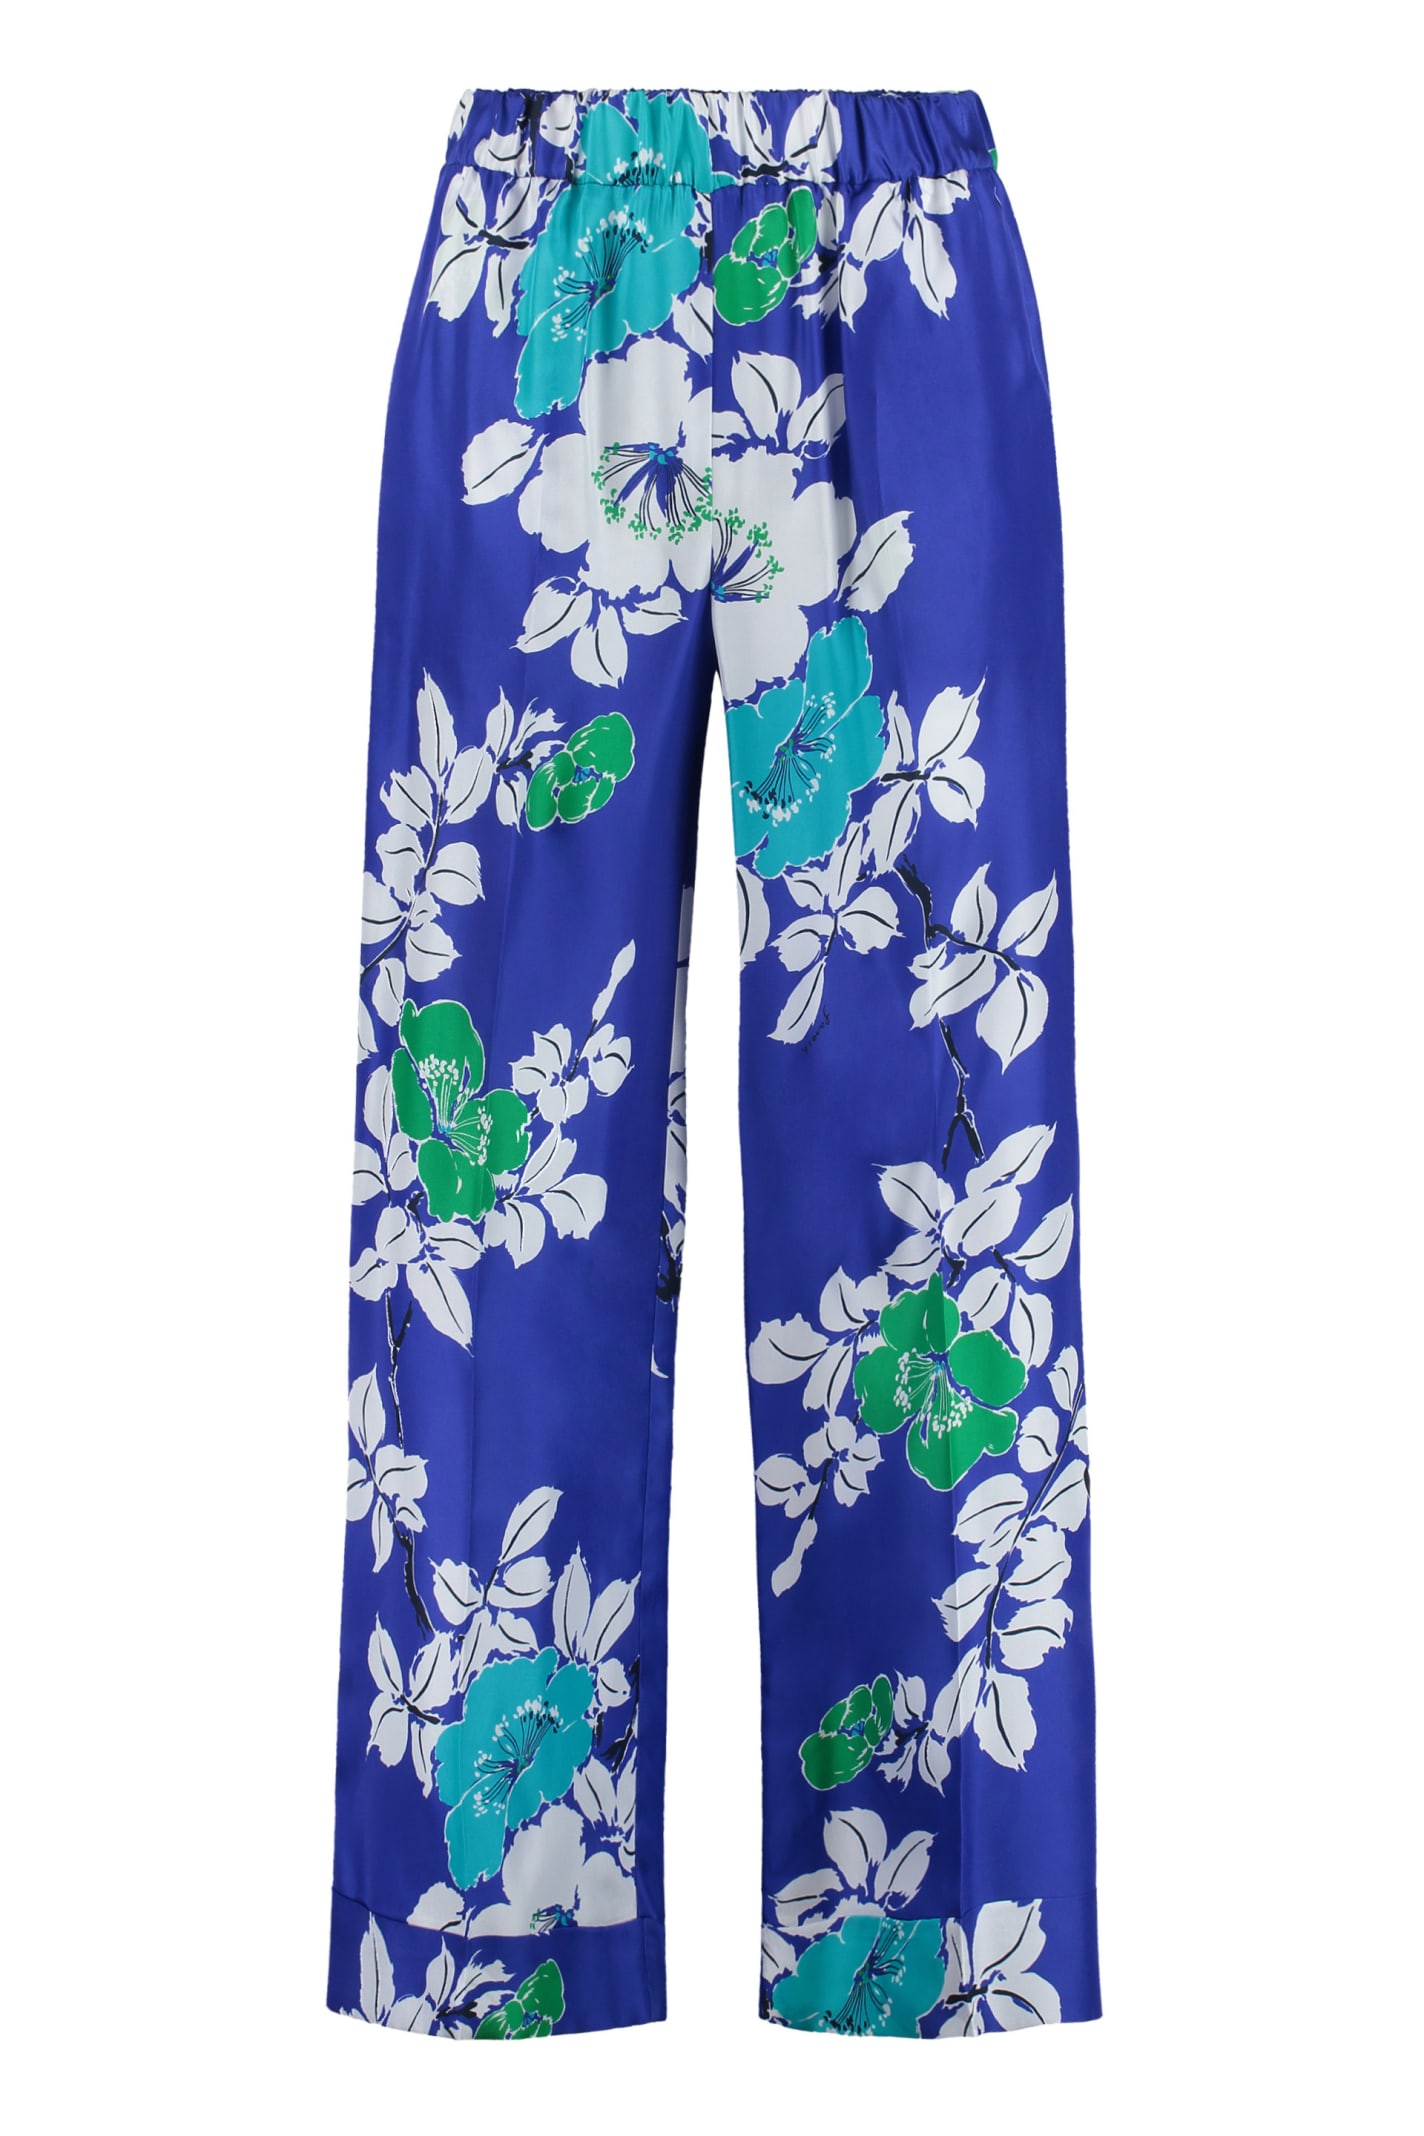 Shop P.a.r.o.s.h Silk Floral Printed Flowers In Blue